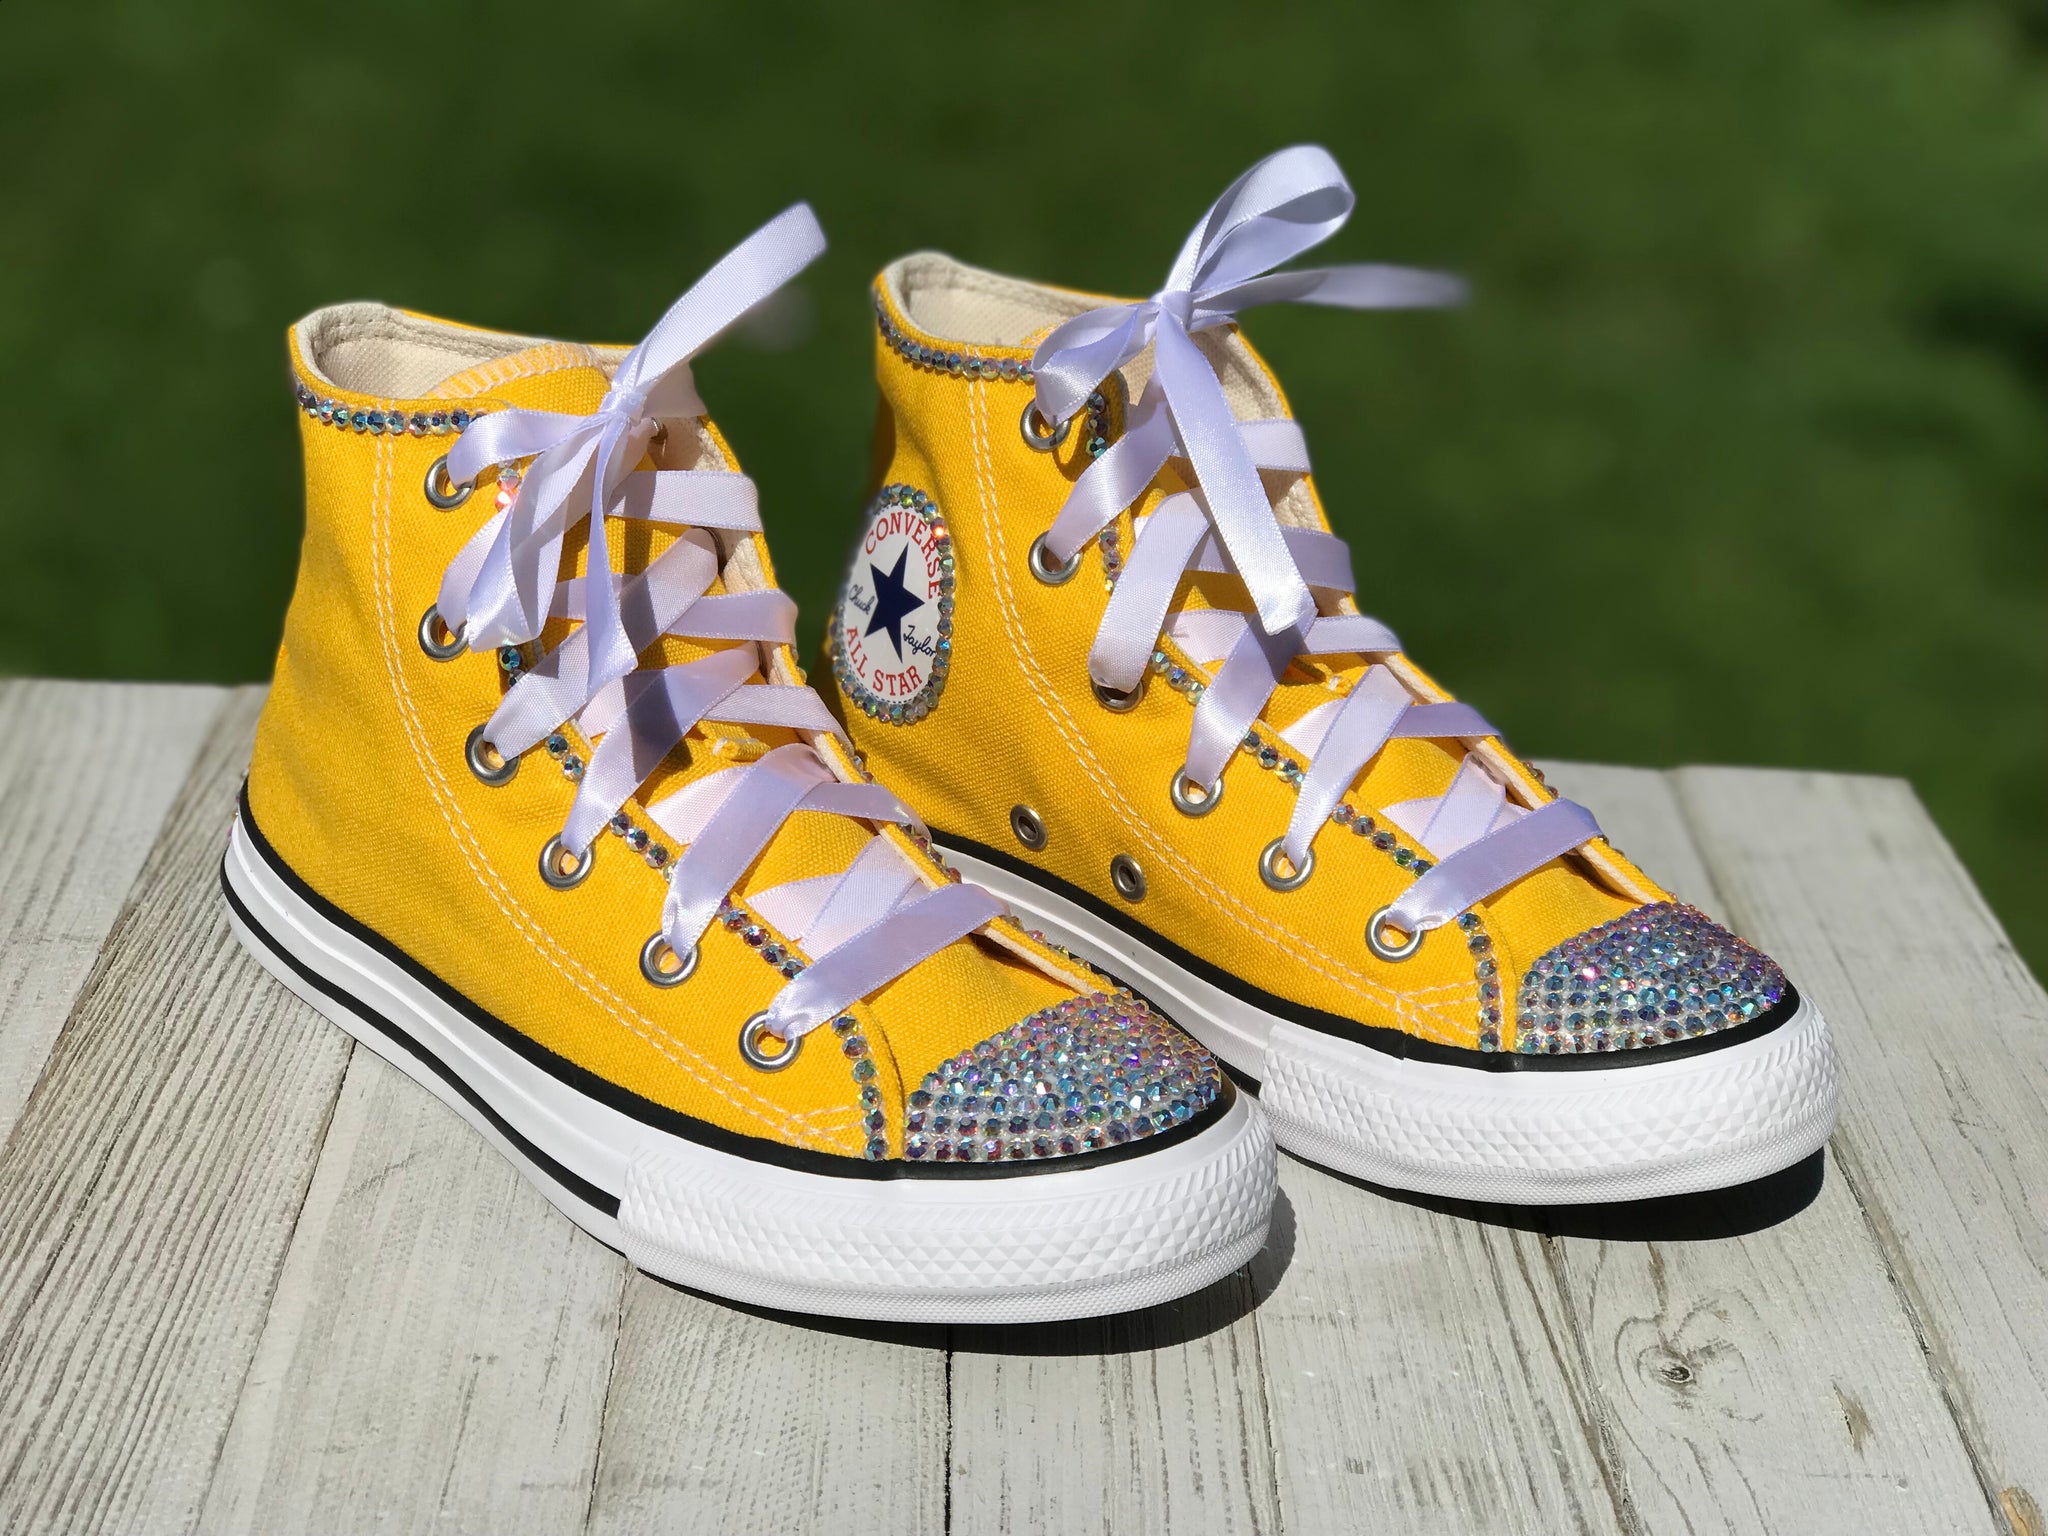 Inloggegevens Verst lens Yellow Blinged Converse Sneakers, Infants and Toddler Shoe Size 2-9 (H |  Little Ladybug Tutus